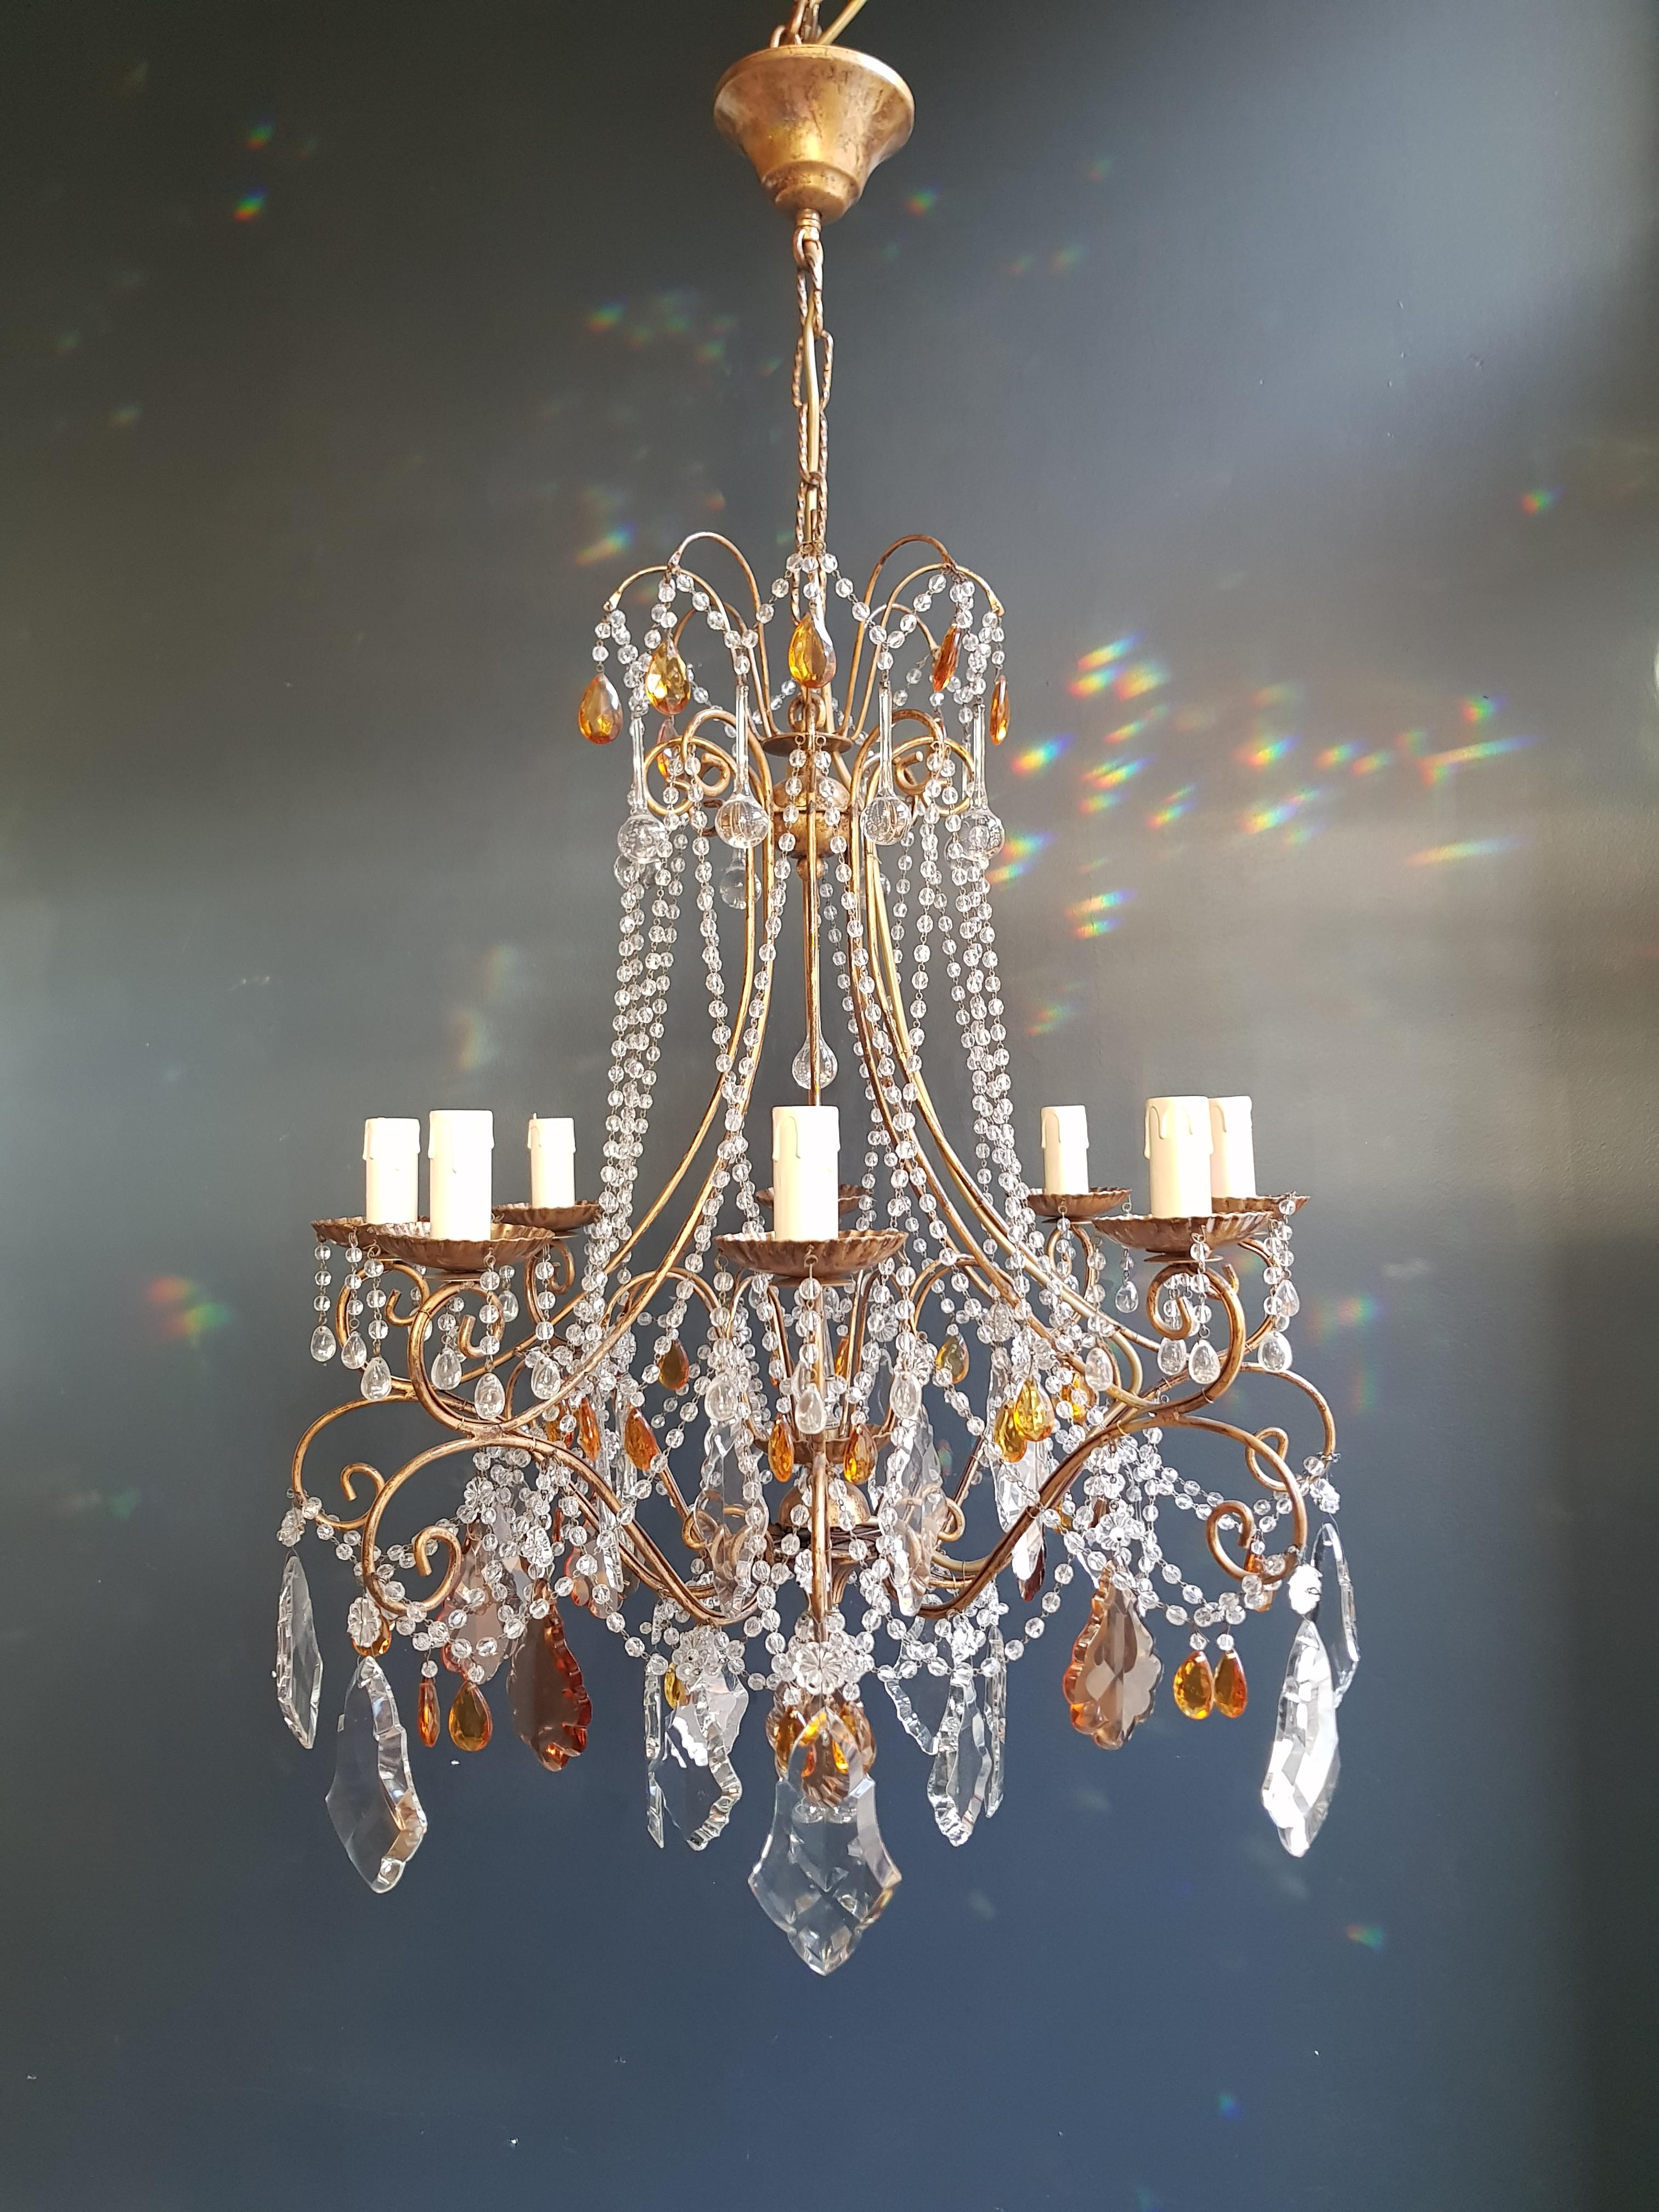 Amber Crystal Chandelier - Antique Ceiling Murano Florentine Lustre in Art Nouveau Style

Presenting an exquisite amber crystal chandelier that embodies the opulence of antique design, drawing inspiration from the Murano Florentine lustre of the Art